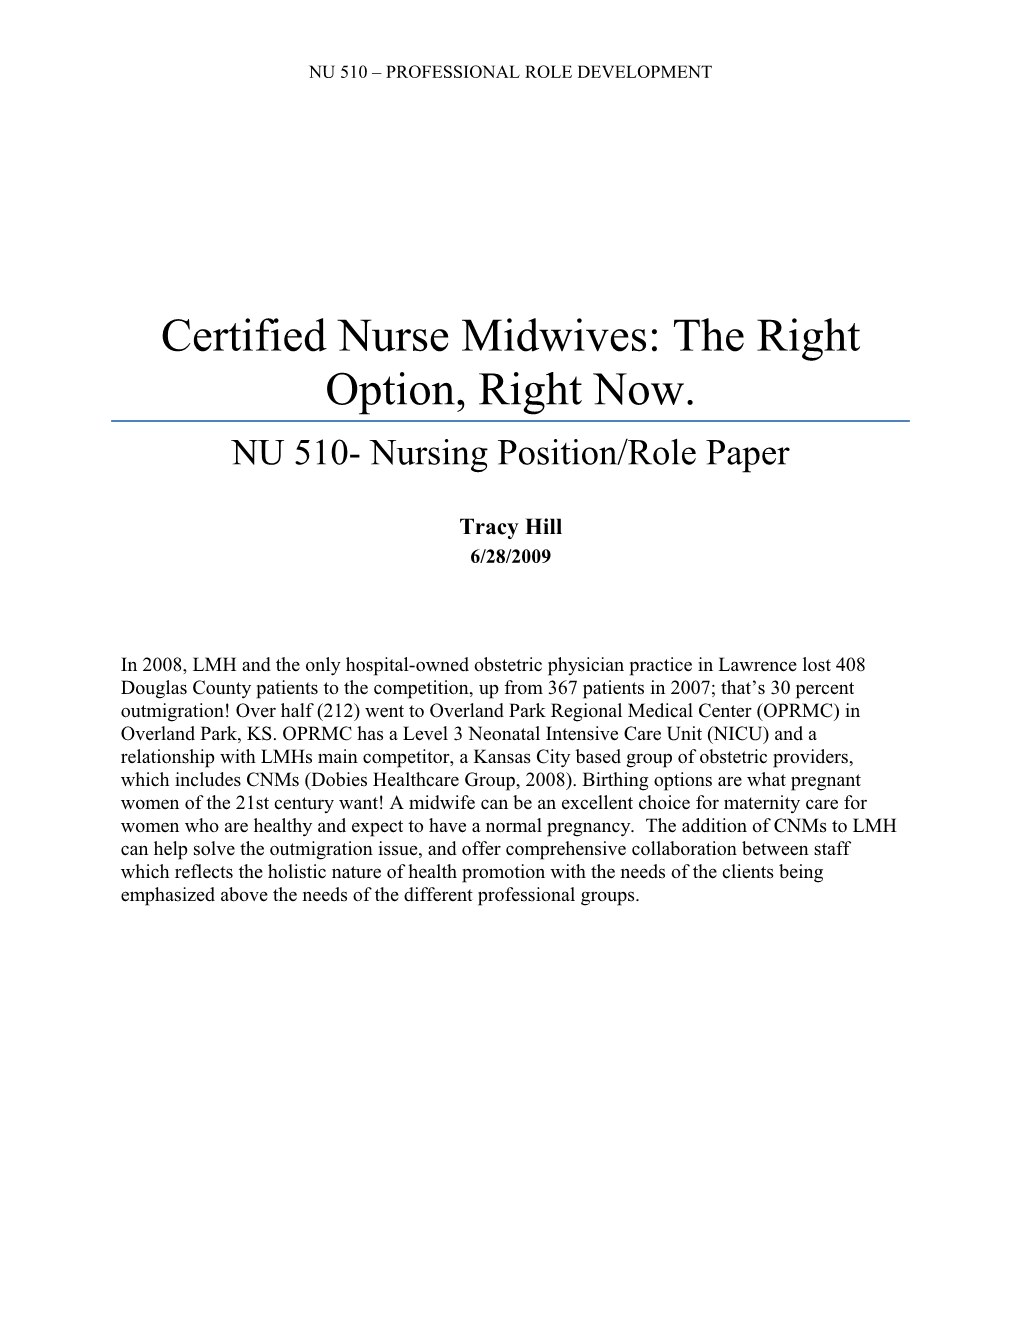 Certified Nurse Midwives: the Right Option, Right Now